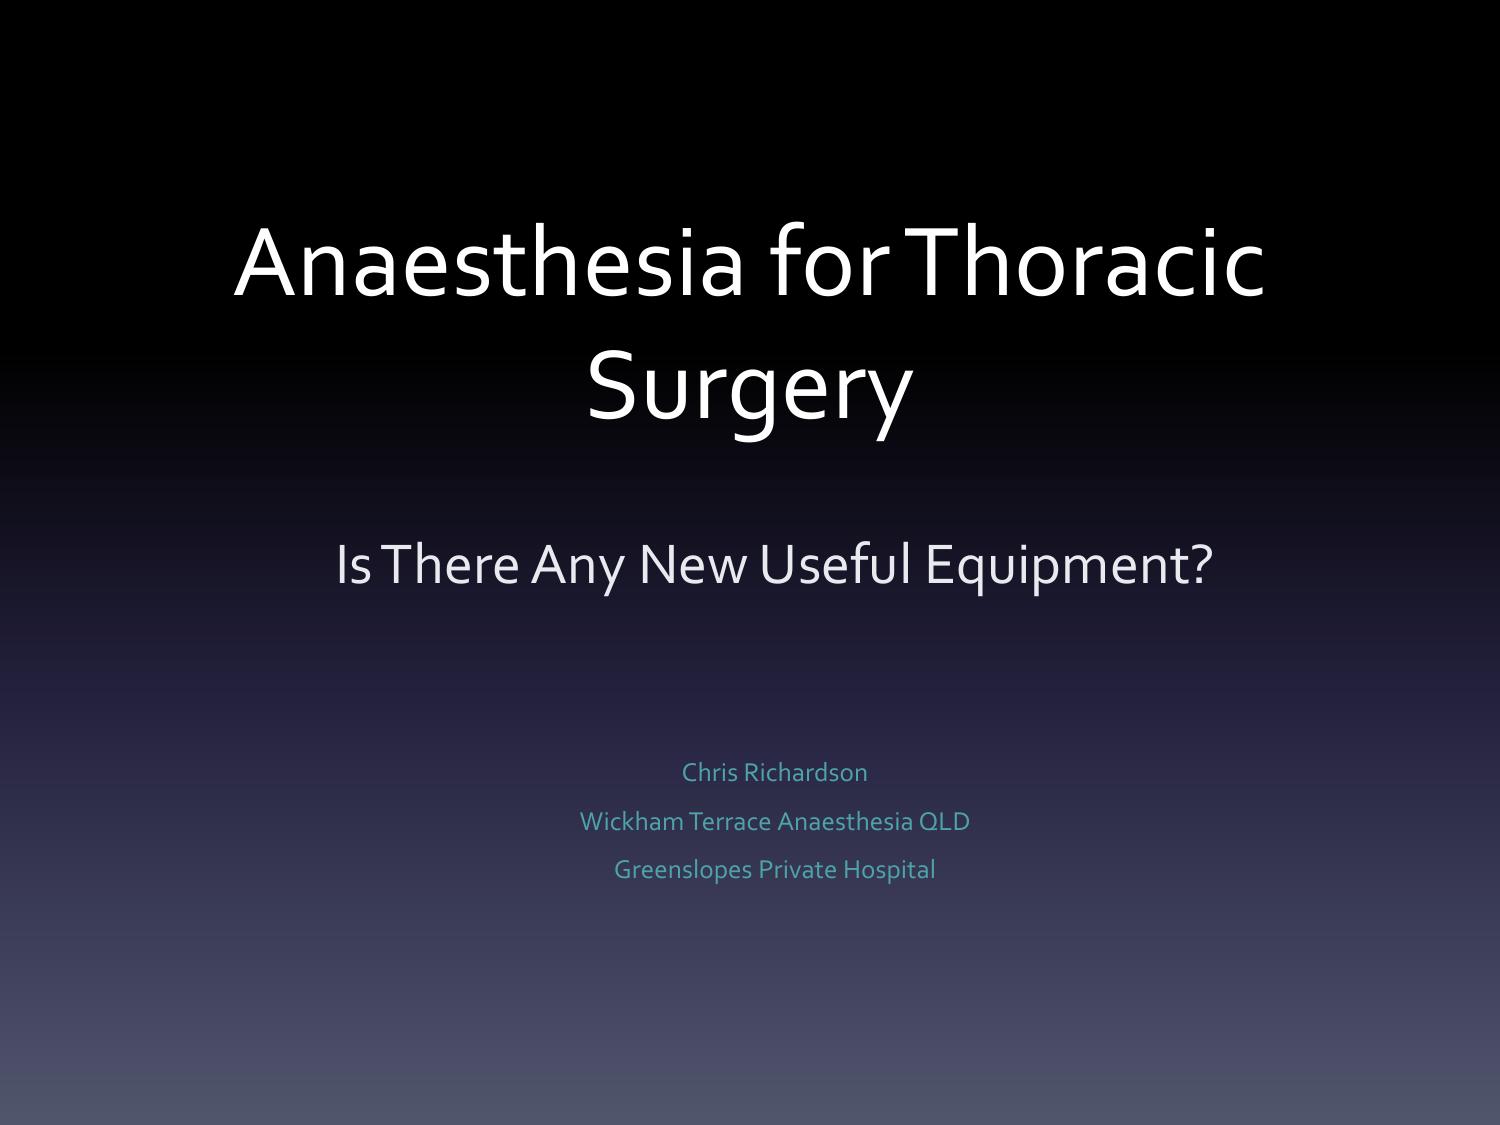 Anaesthesia for Thoracic Surgery